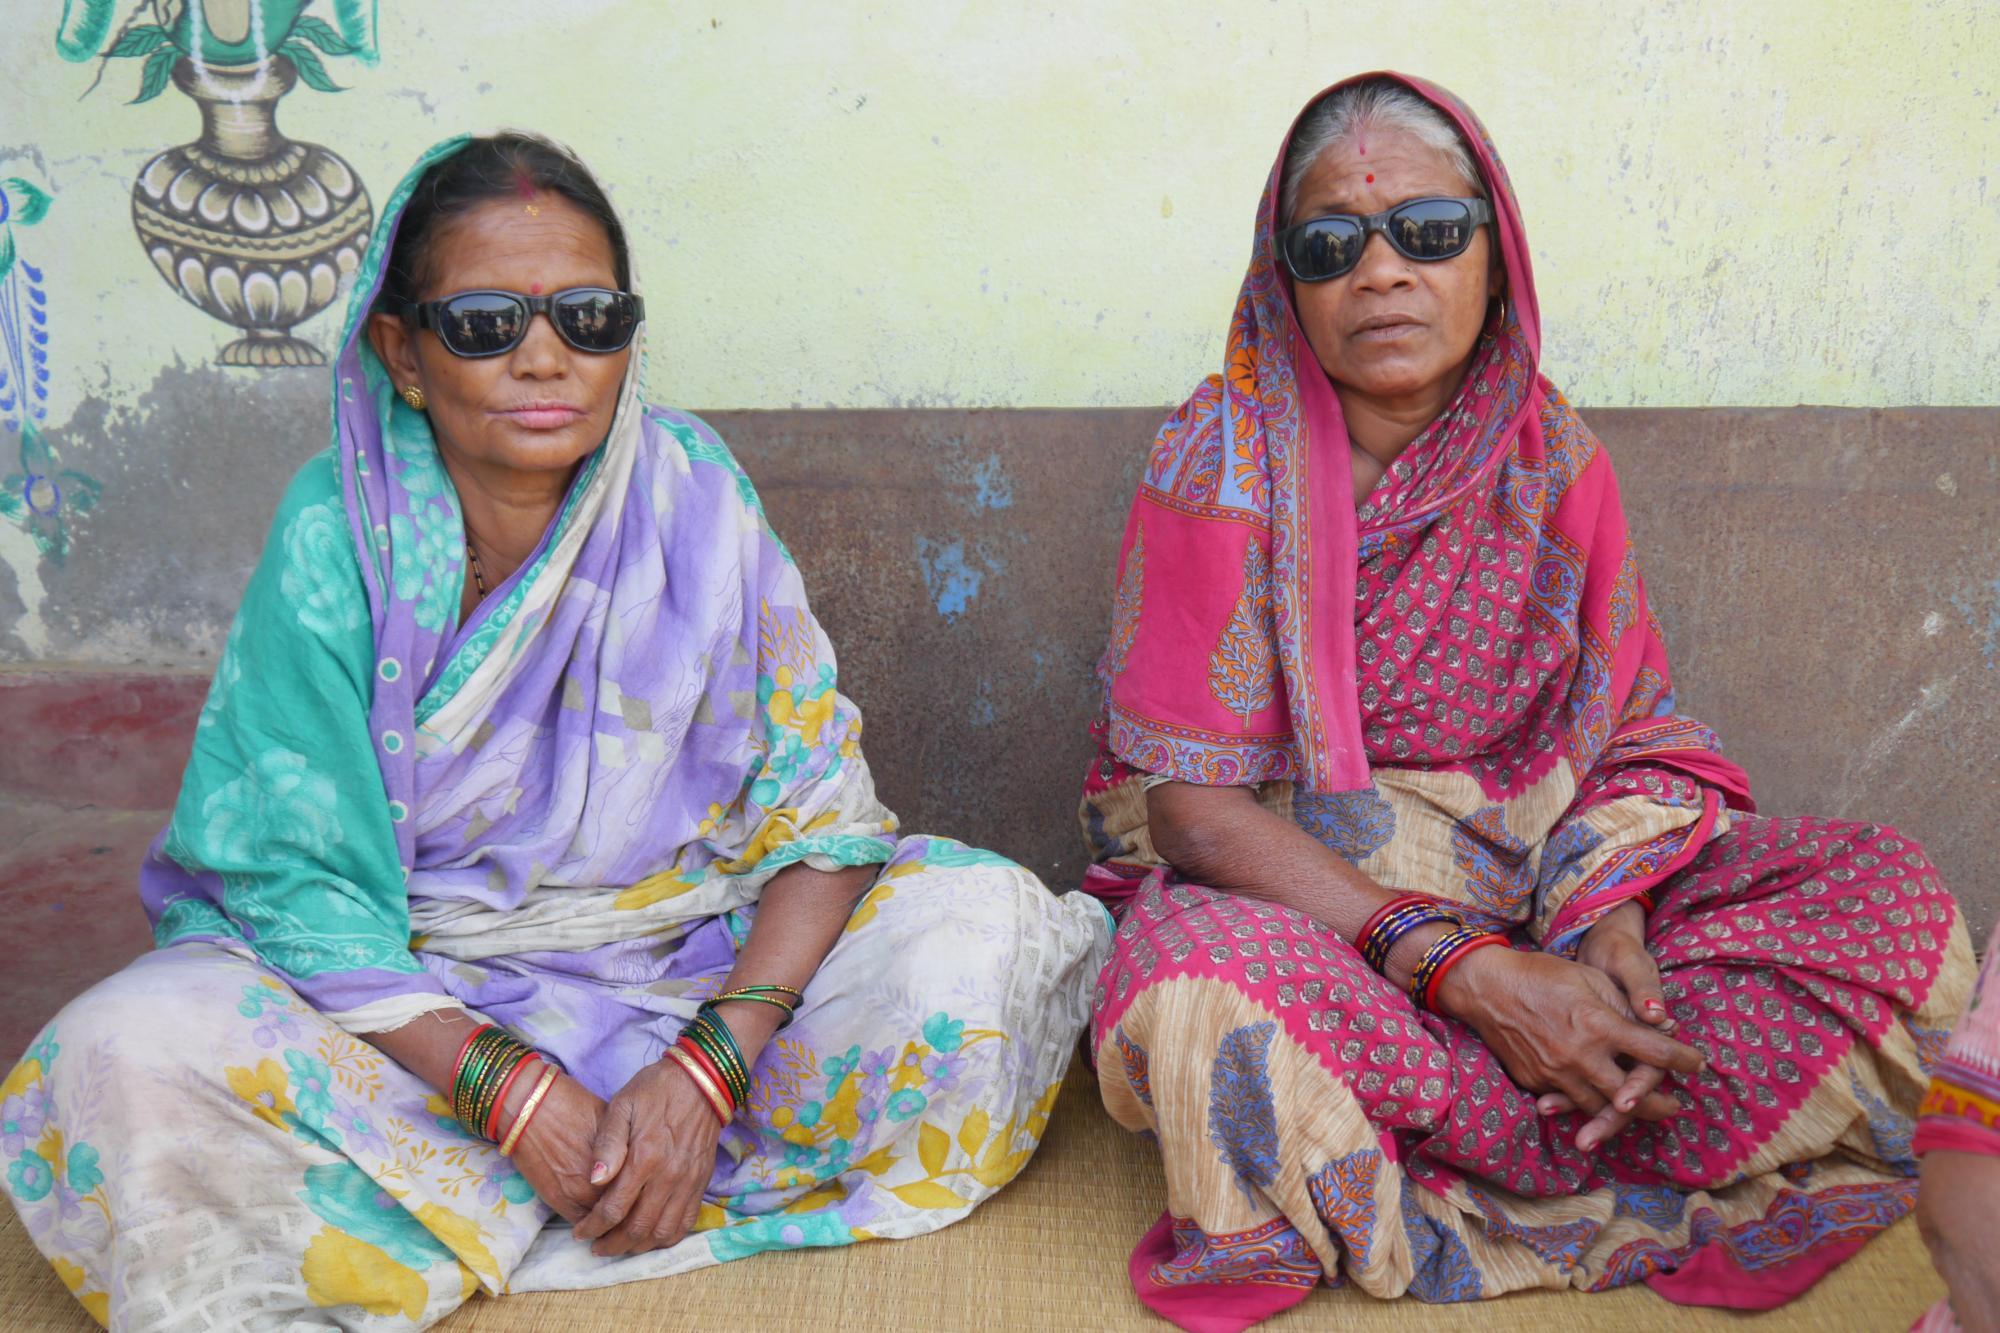 Two Indian women with sunglasses